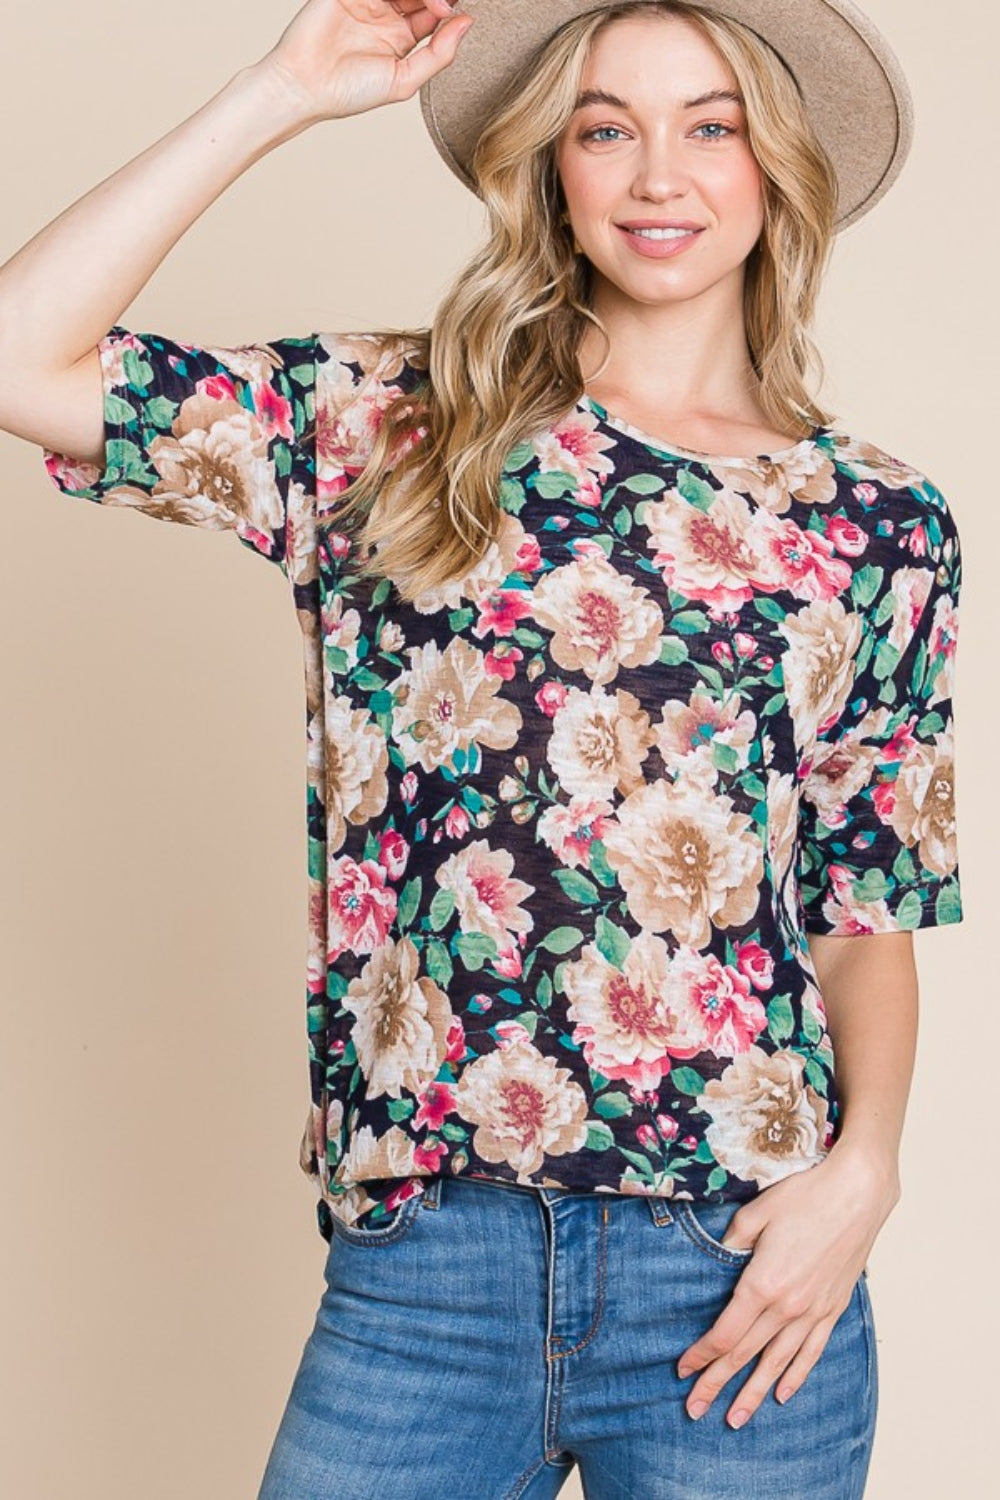 BOMBOM Floral Round Neck T-Shirt for Women - Stylish & Comfortable Top with Elegant Flower Design, Perfect for Casual Wear